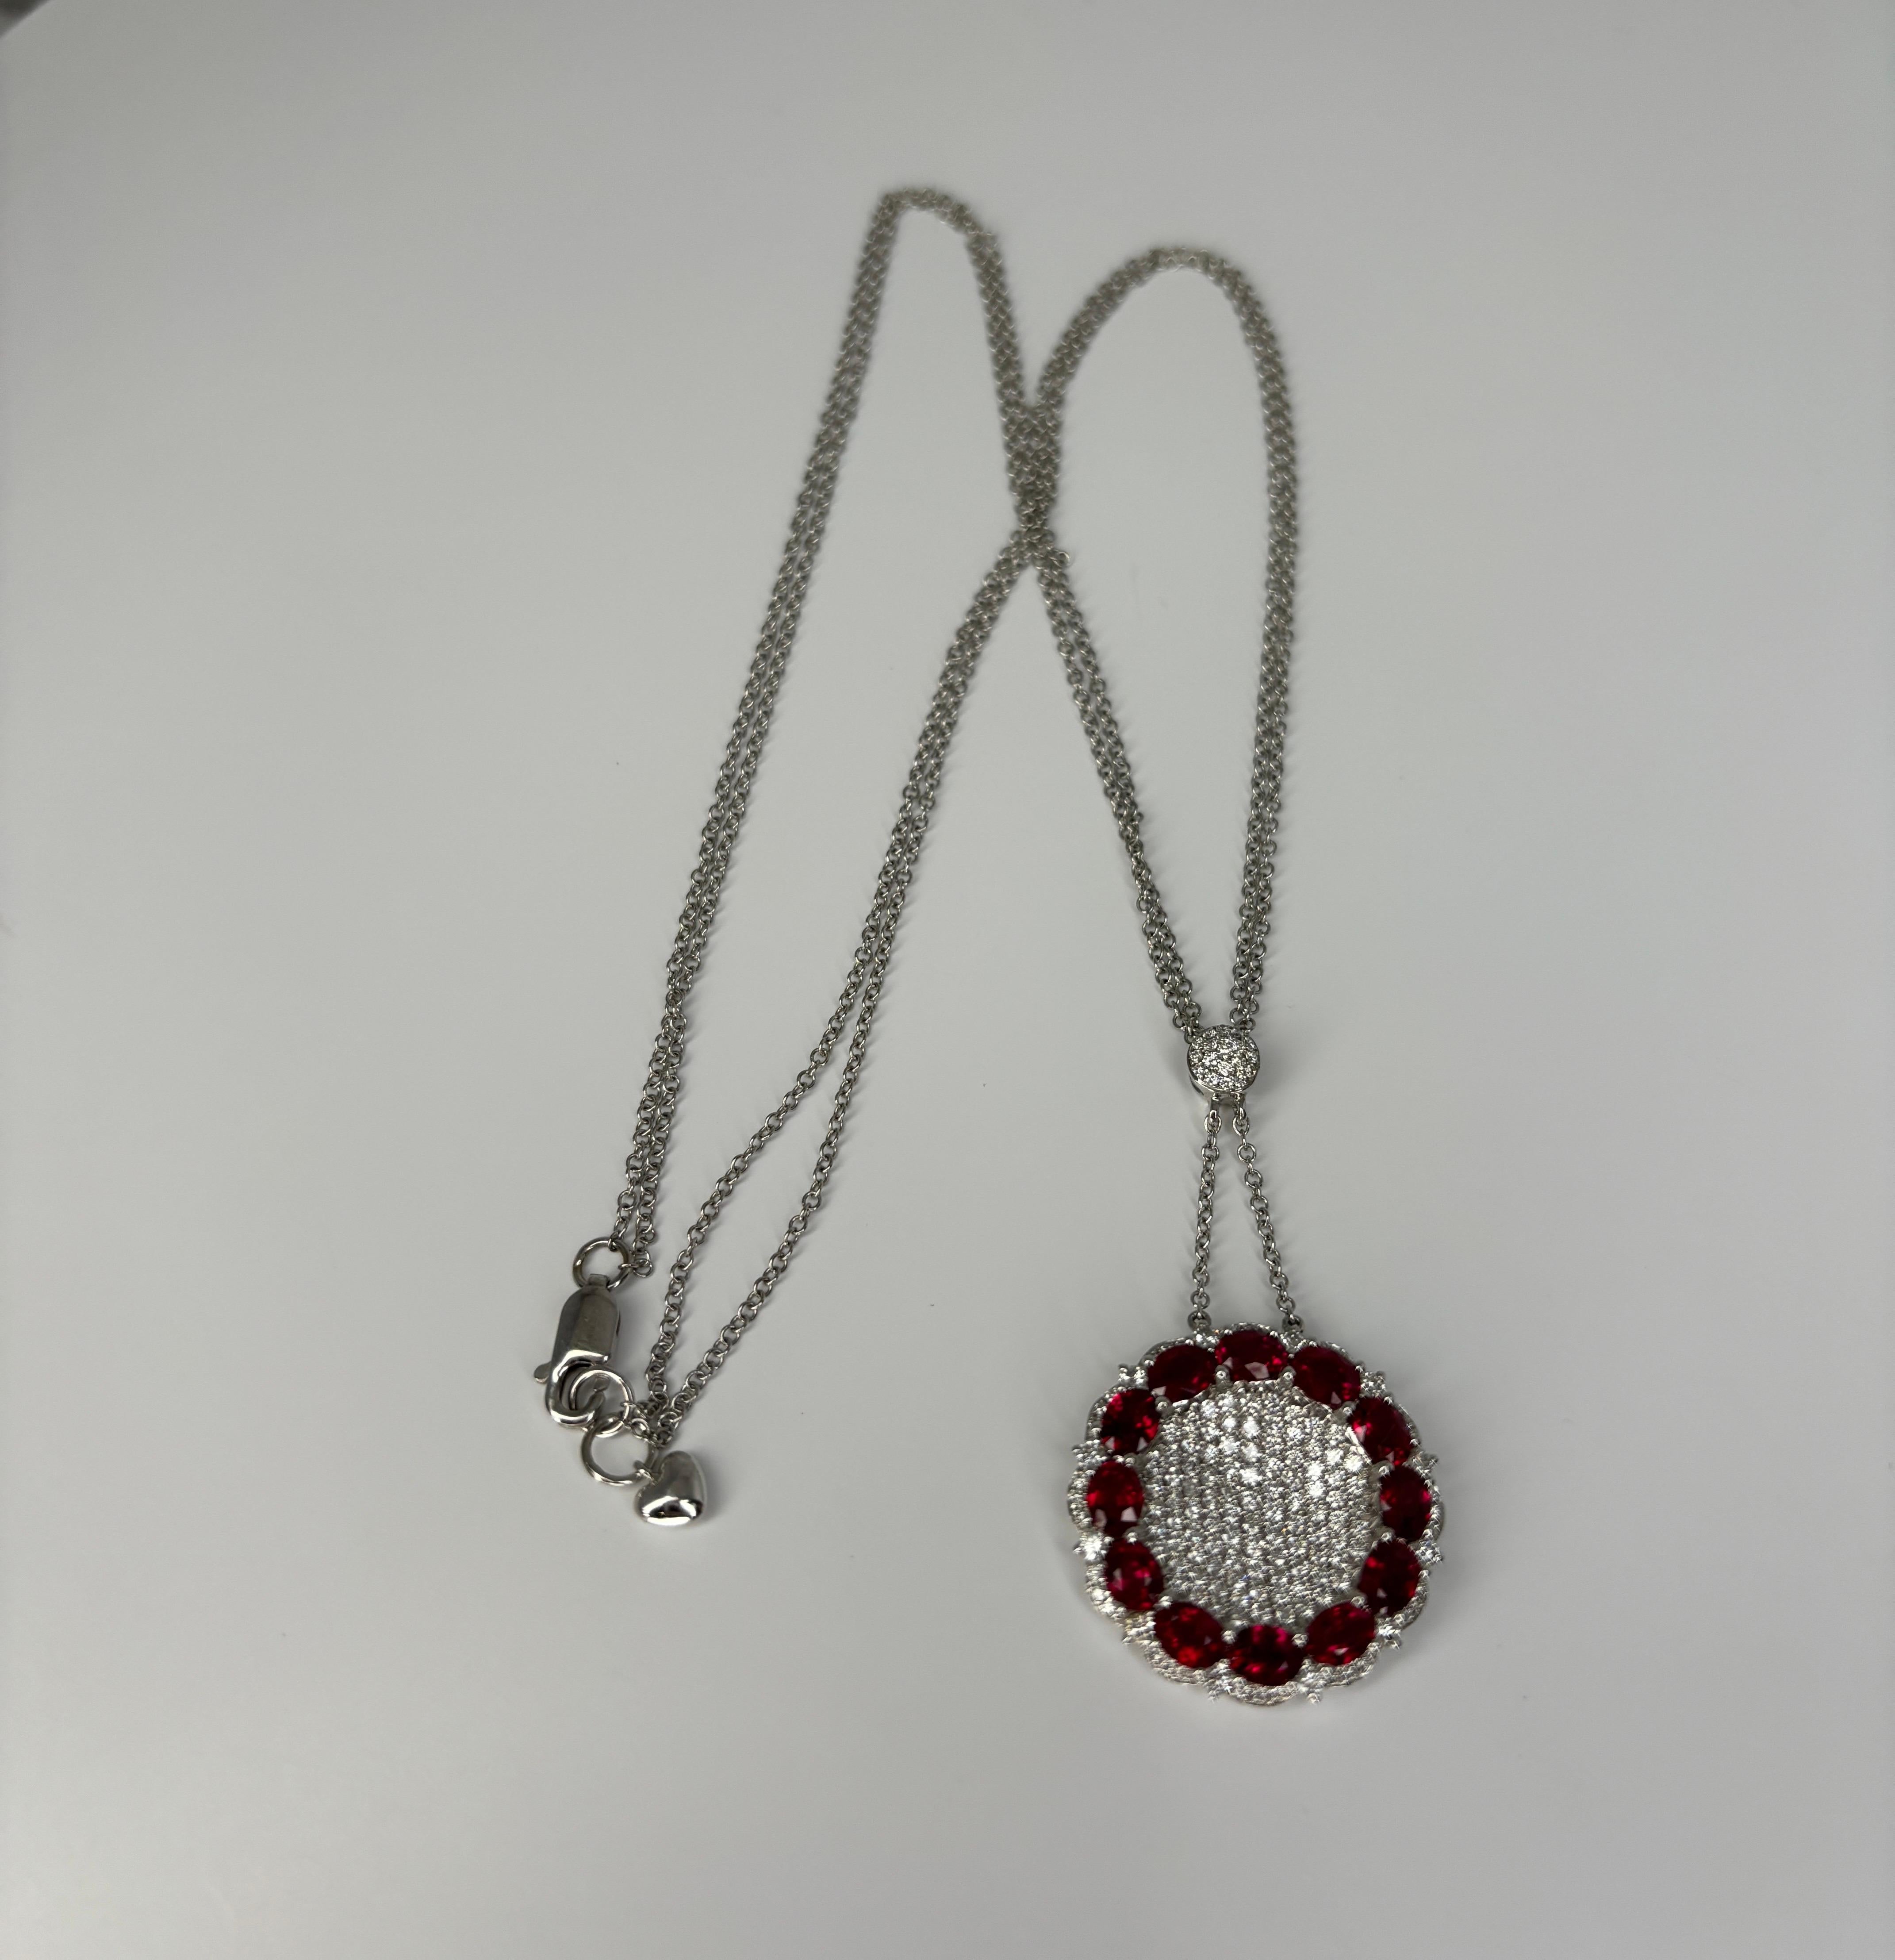 14k White Gold 5.04cttw Natural Ruby & Diamond Round Pendant Necklace  In Good Condition For Sale In Bernardsville, NJ